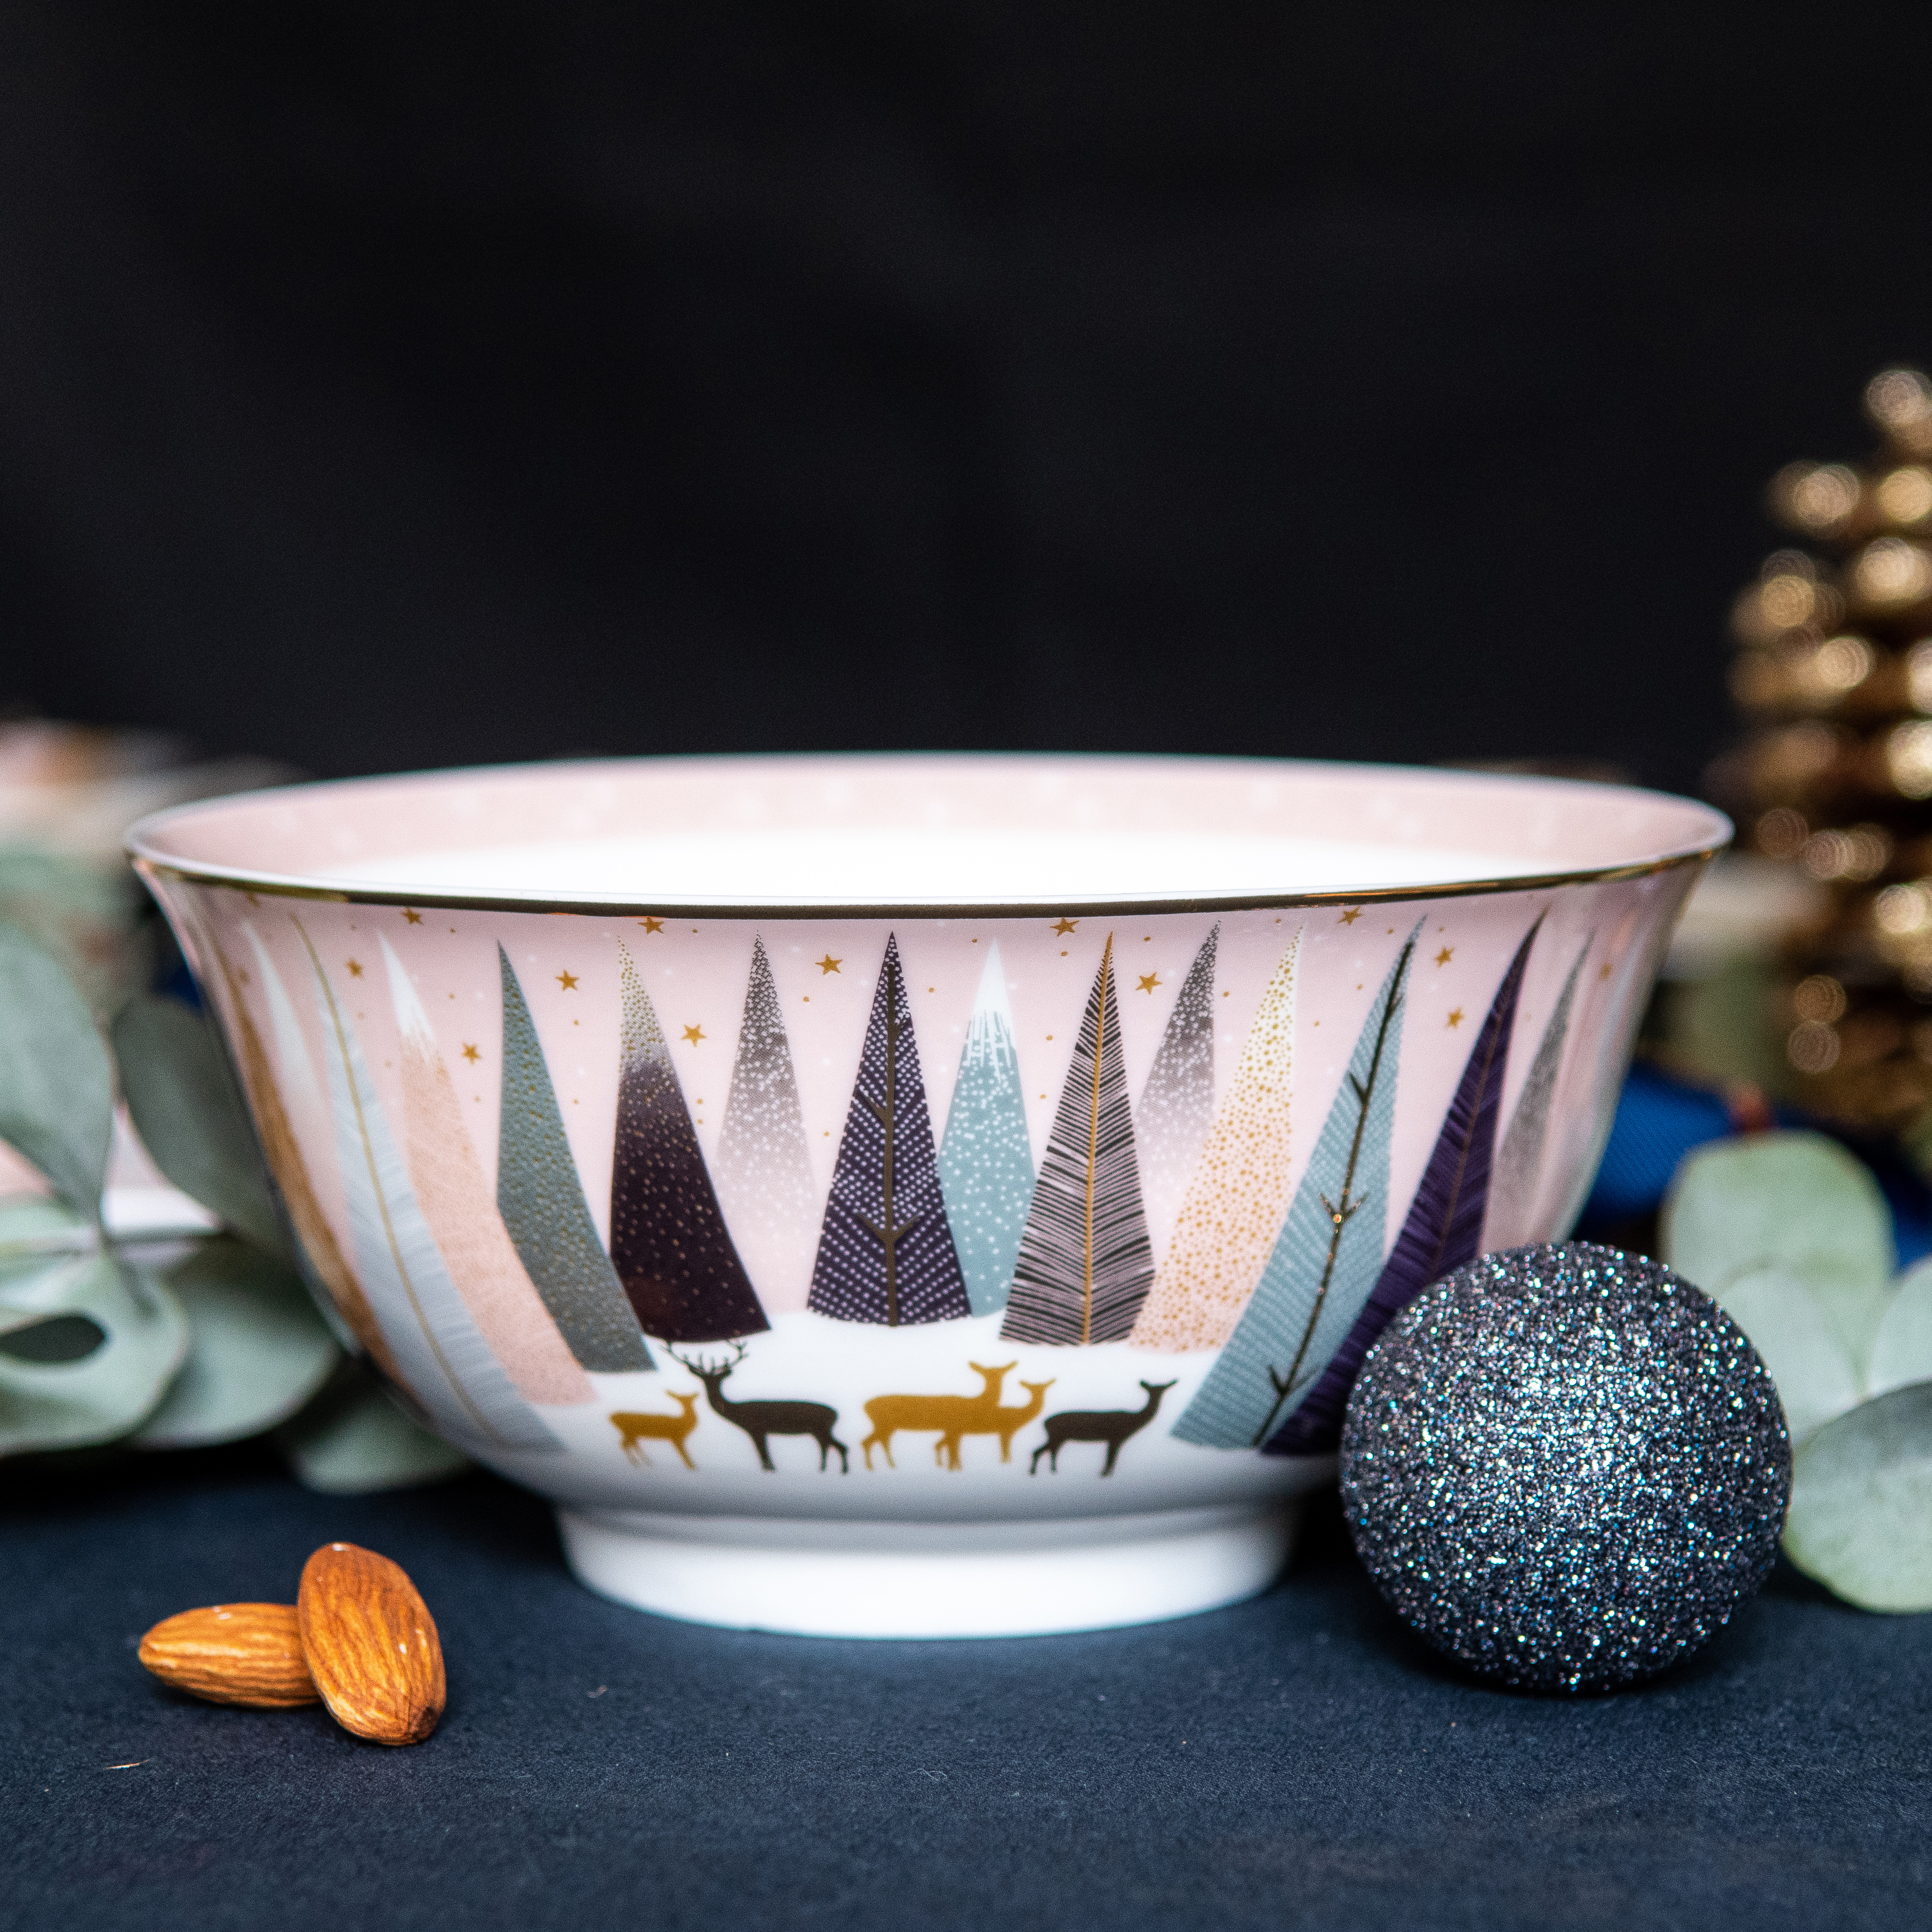 Sara Miller Frosted Pines Candy Bowl image number null